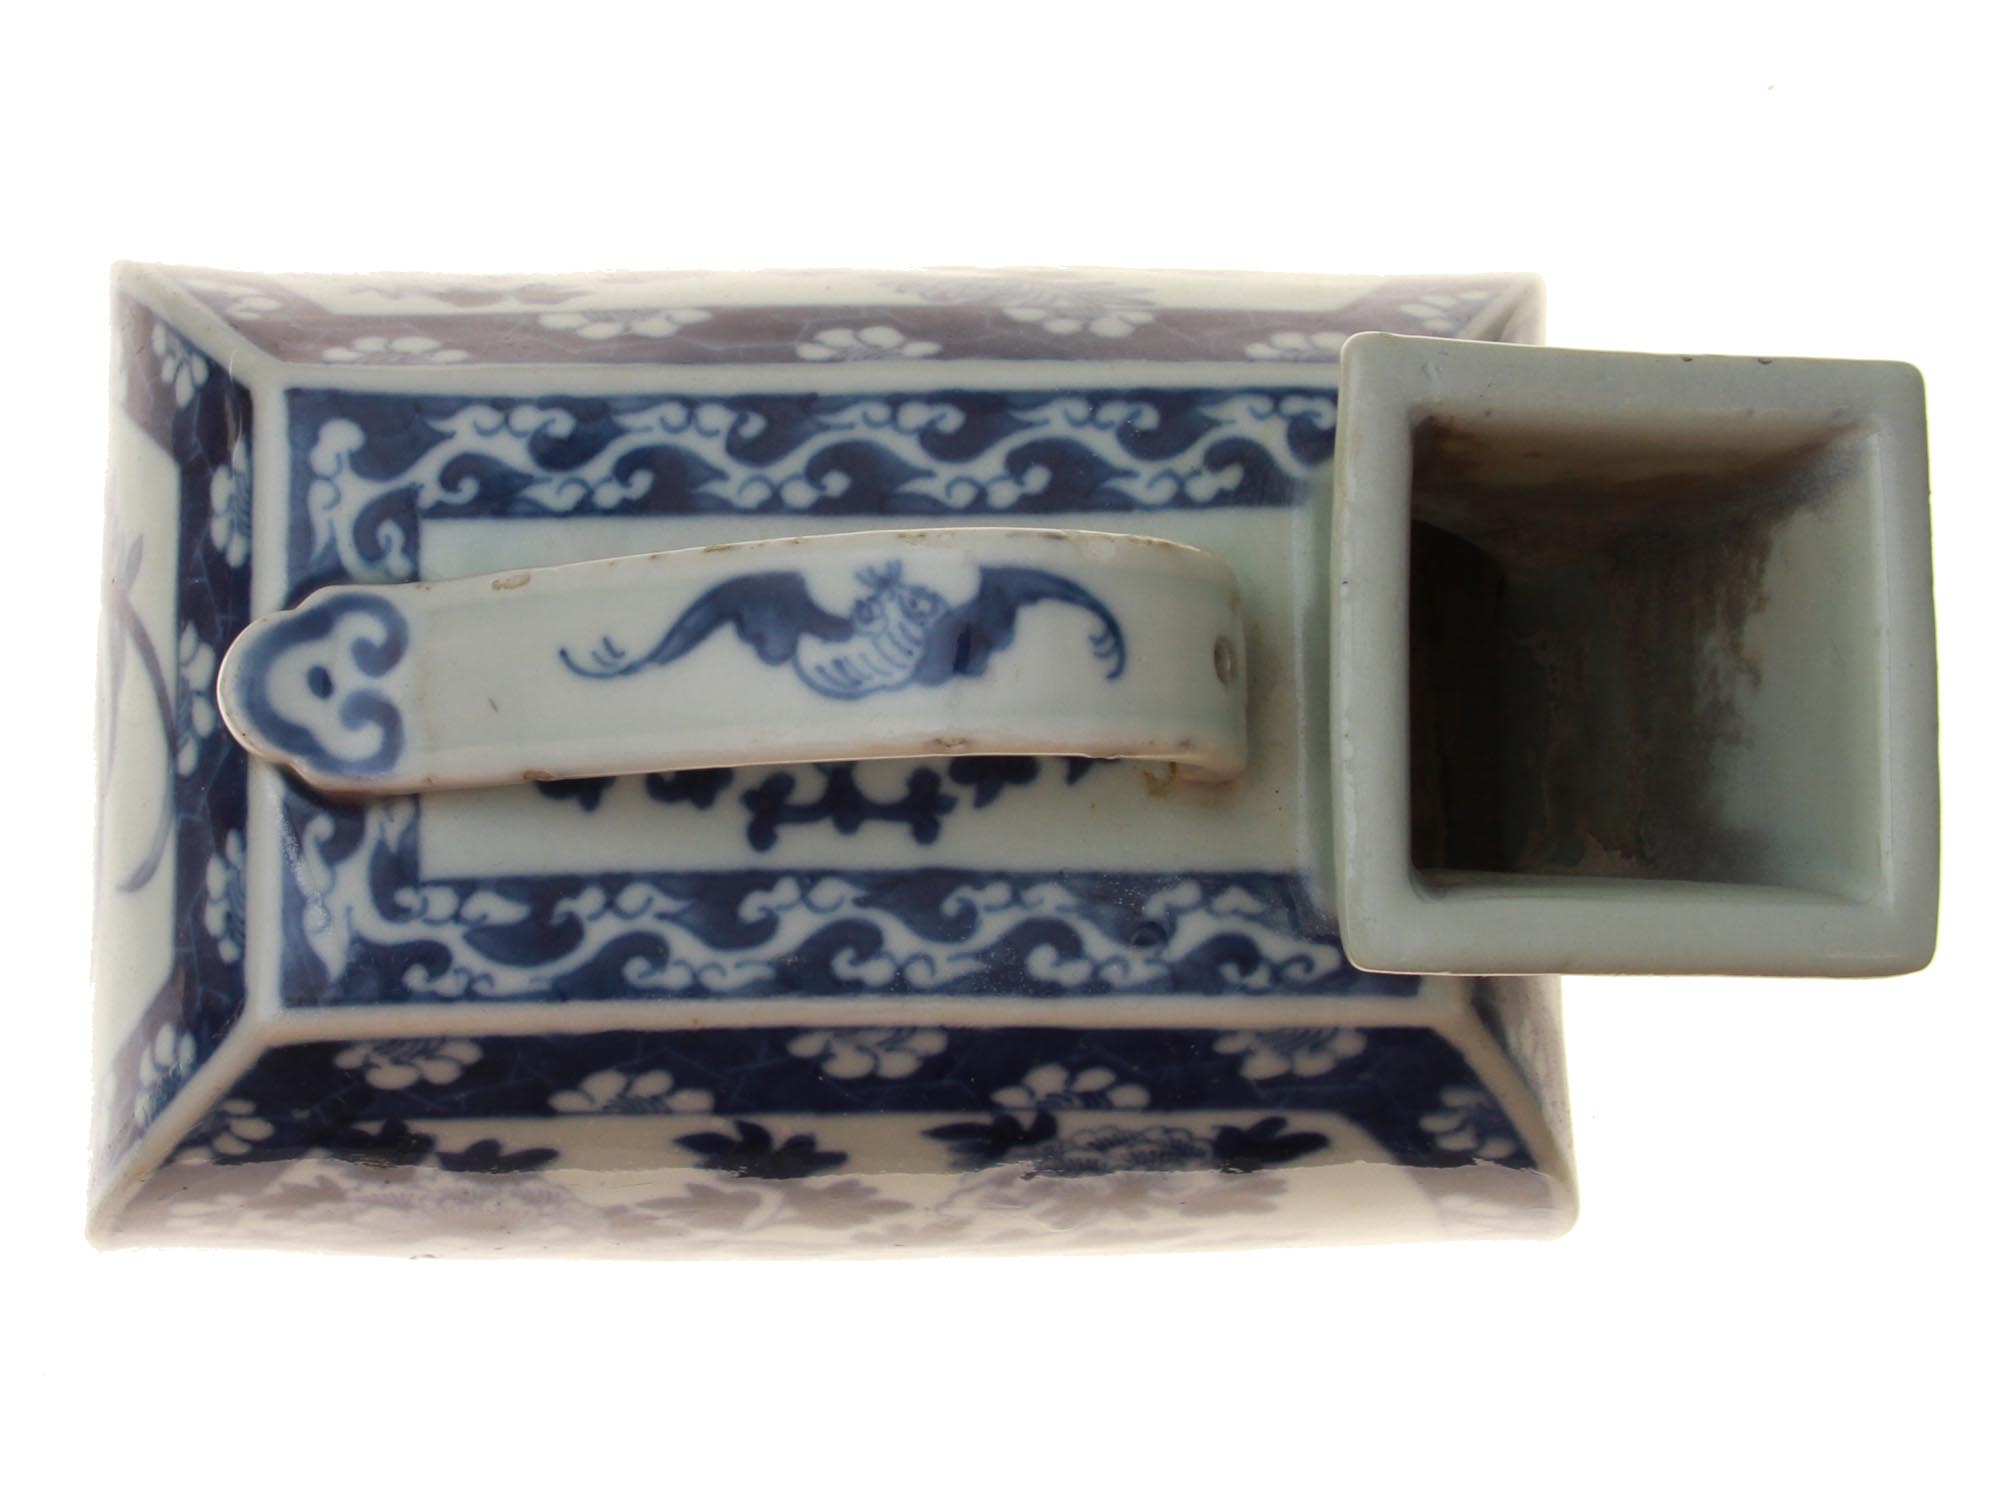 AN ANTIQUE CHINESE PORCELAIN URINAL 18TH -19TH C. PIC-4